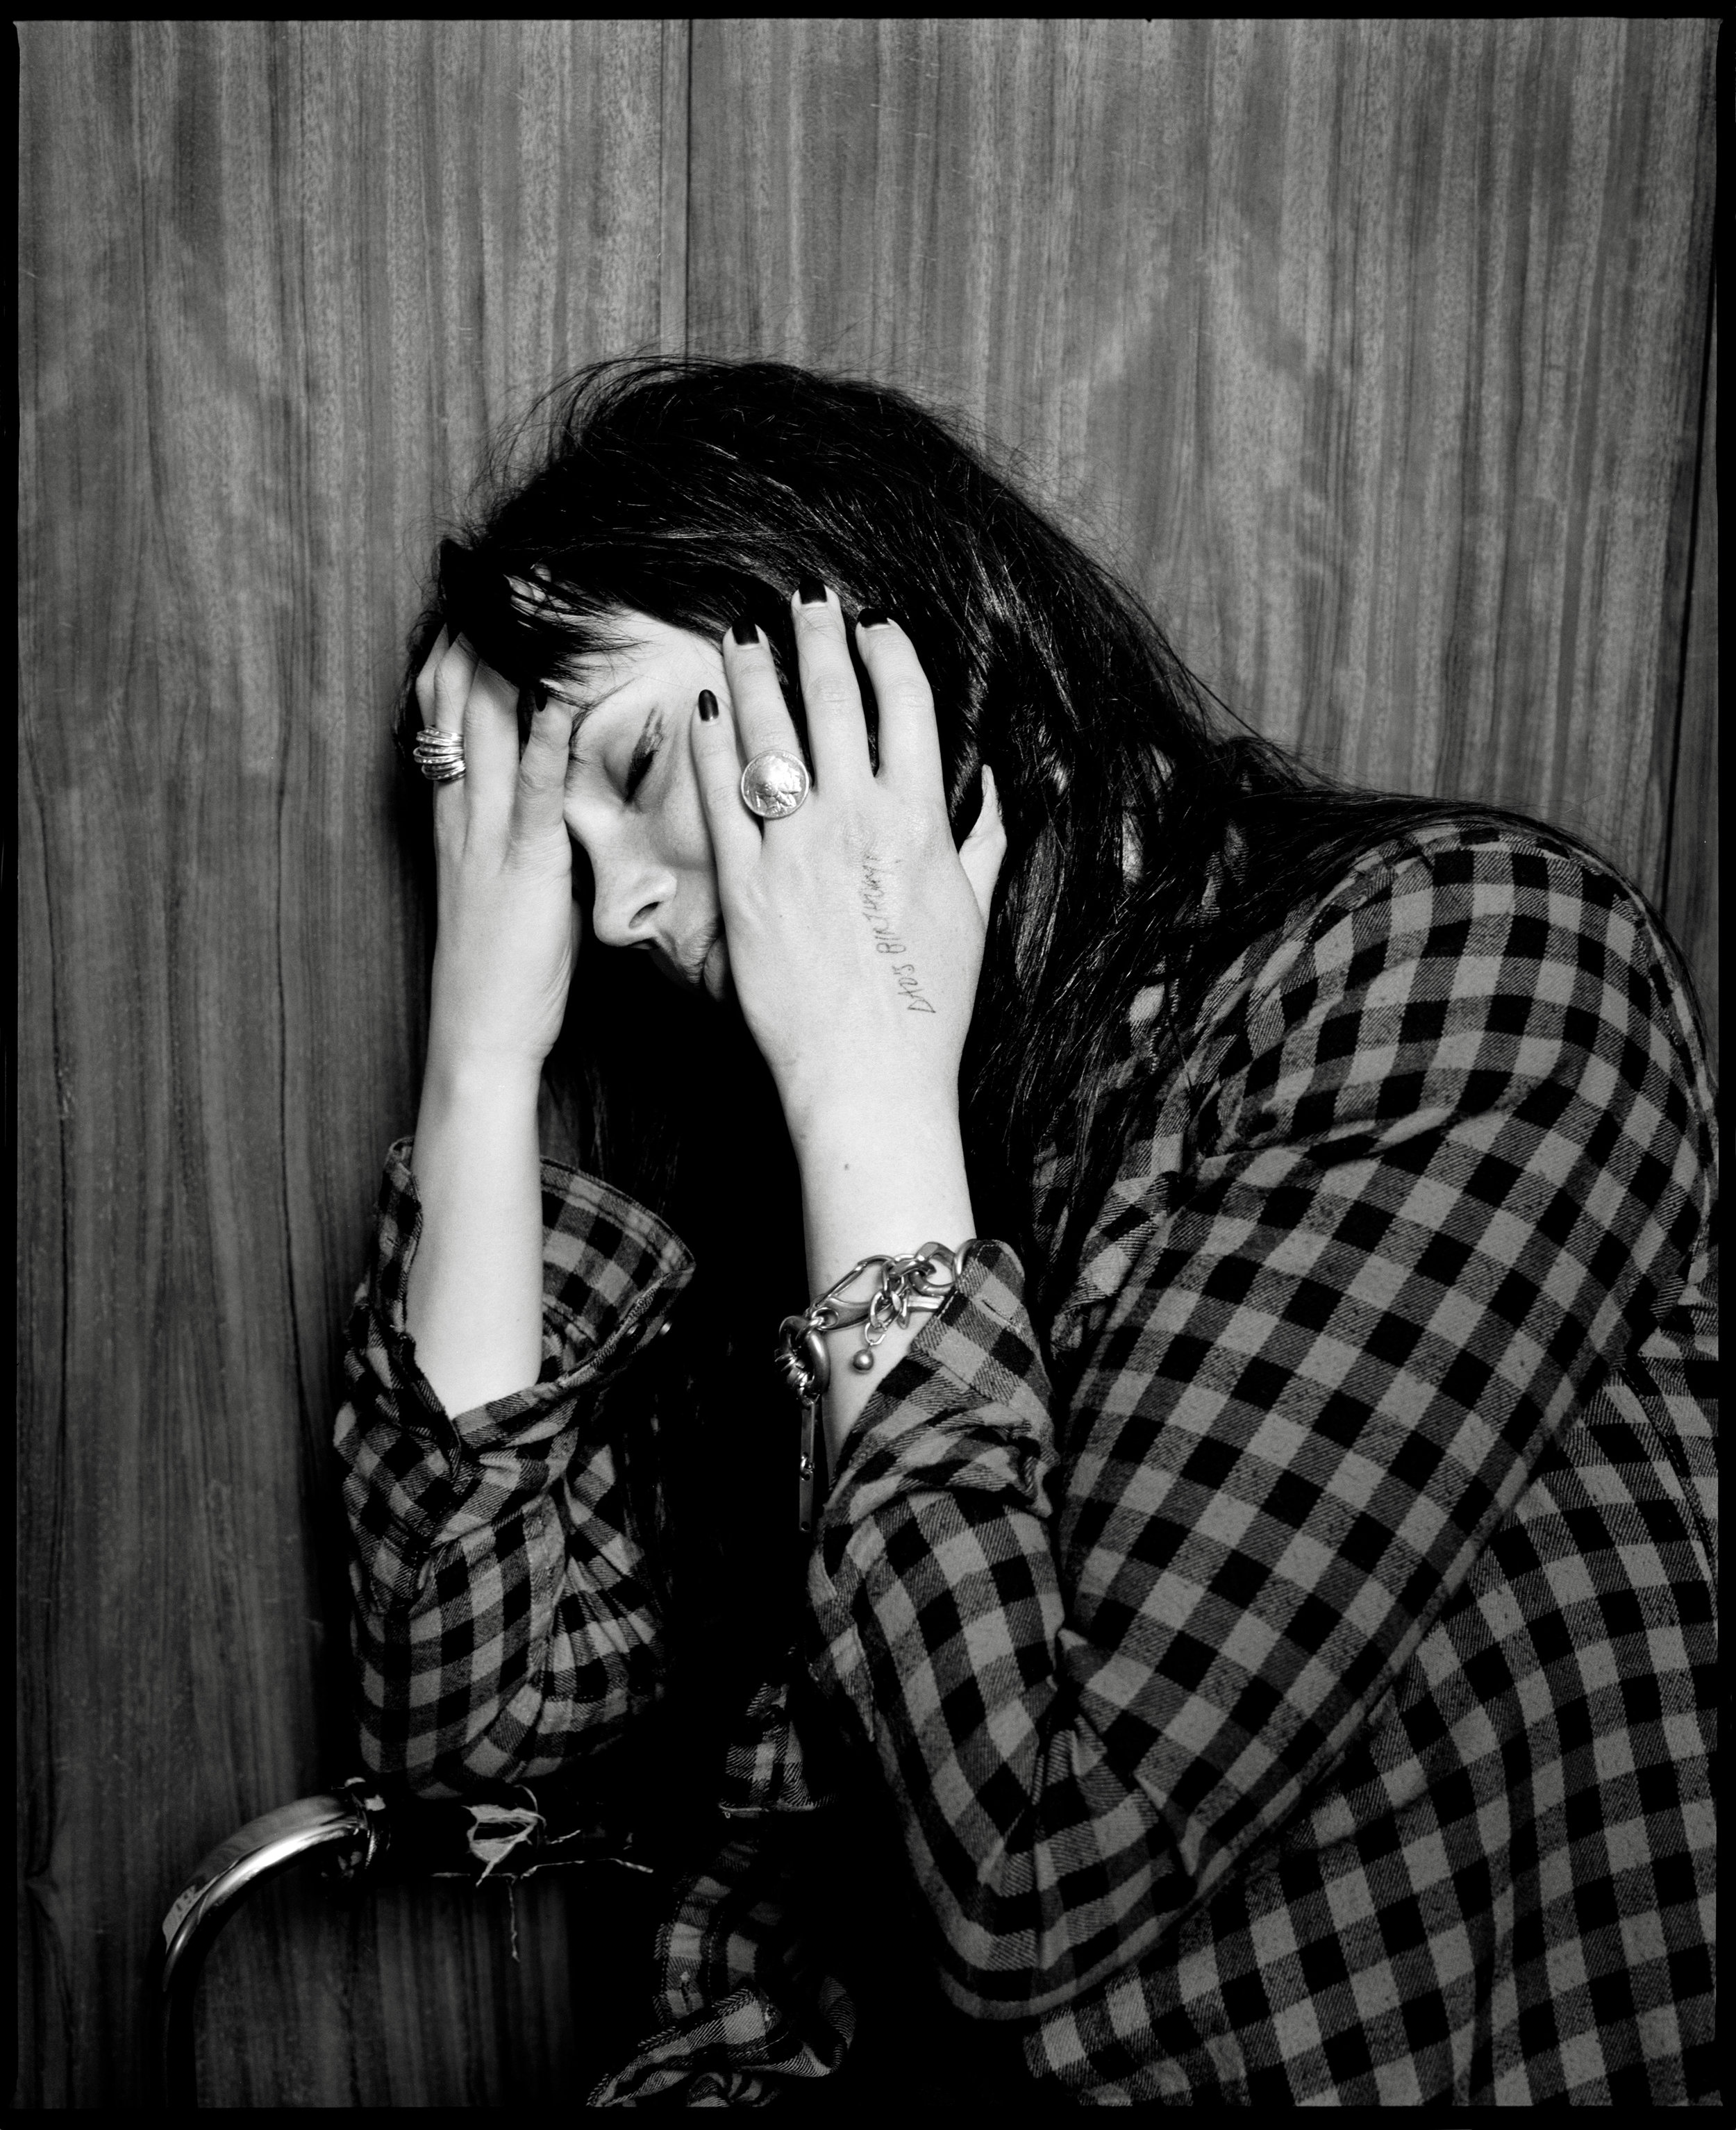 Alison Mosshart /The Kills, The Dead Weather